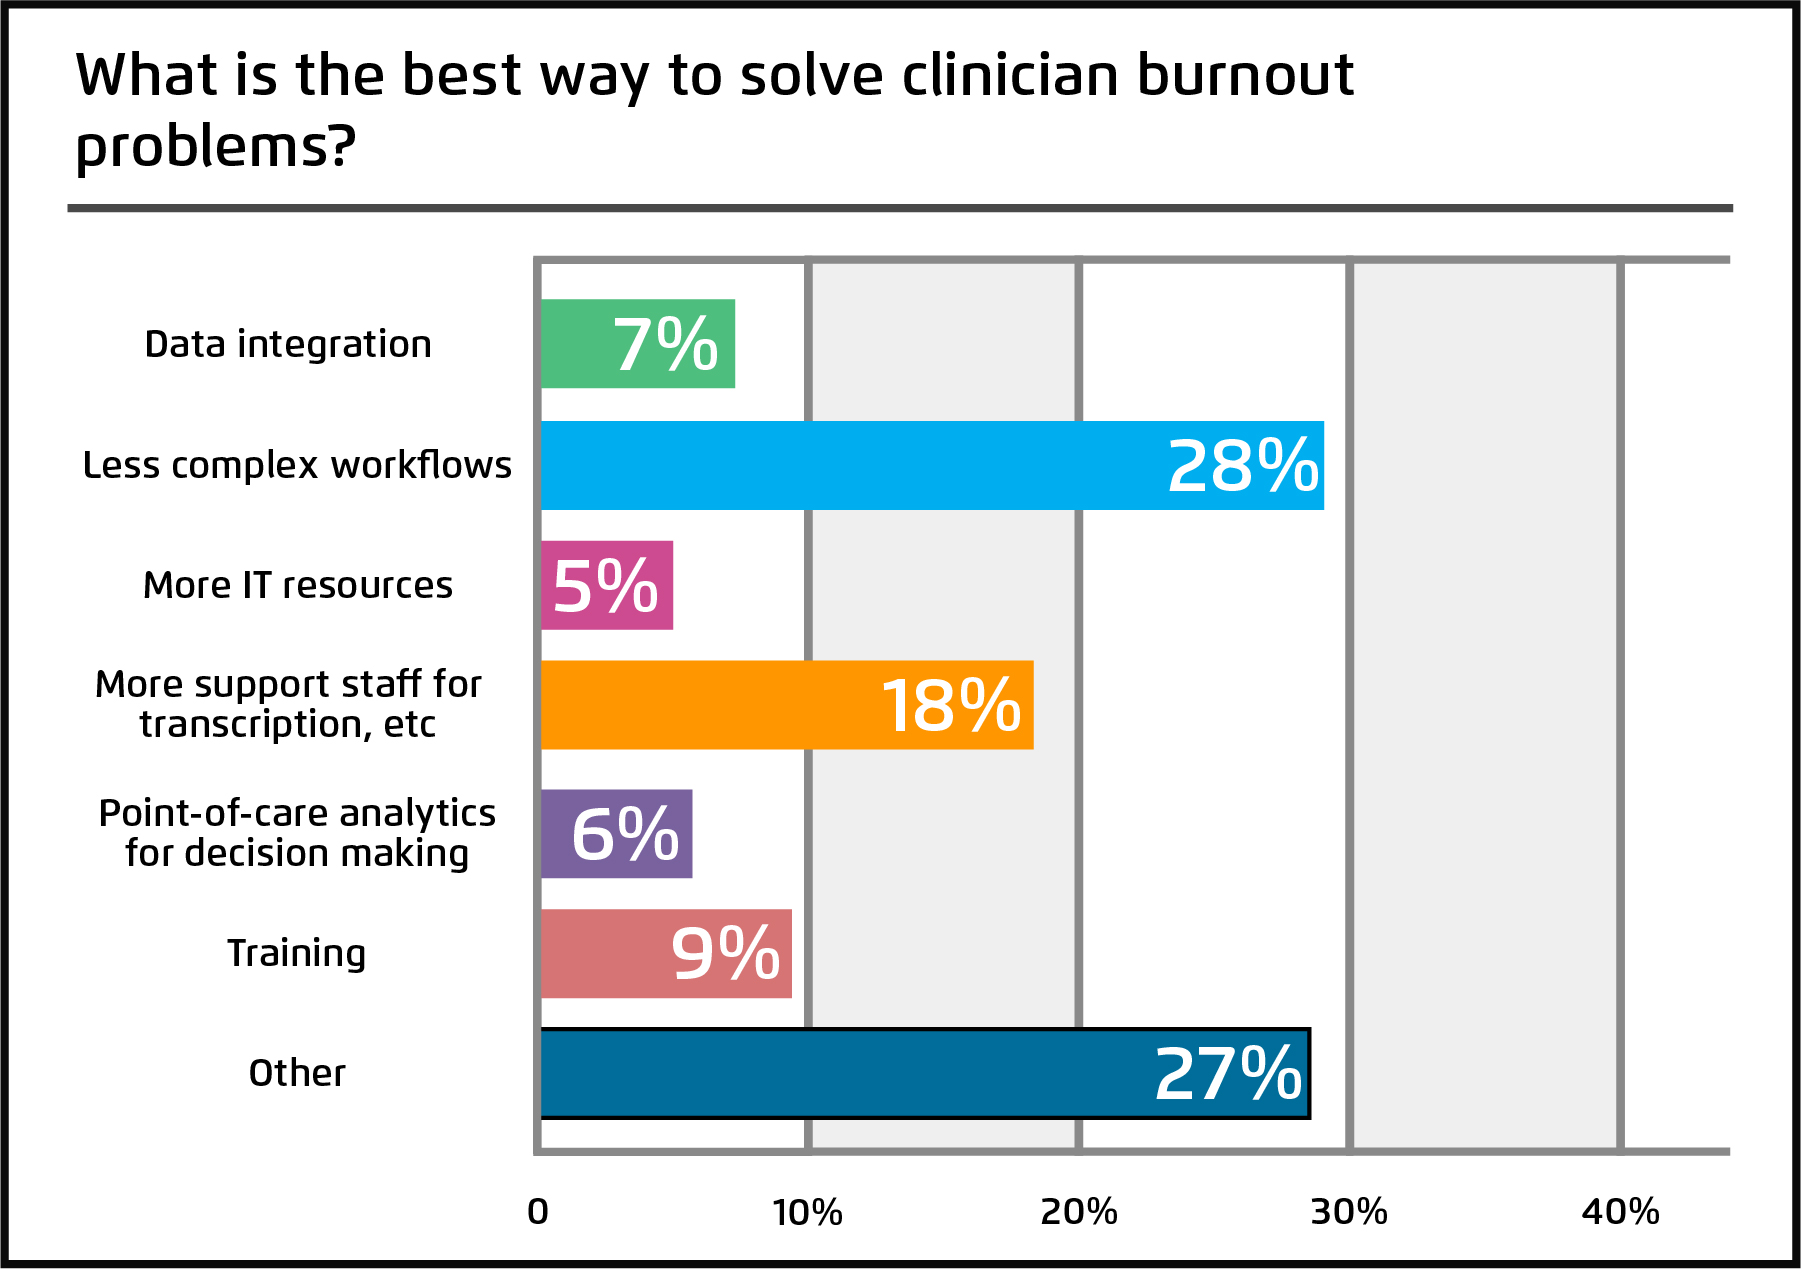 Chart of responses to ways to solve clinician burnout problems